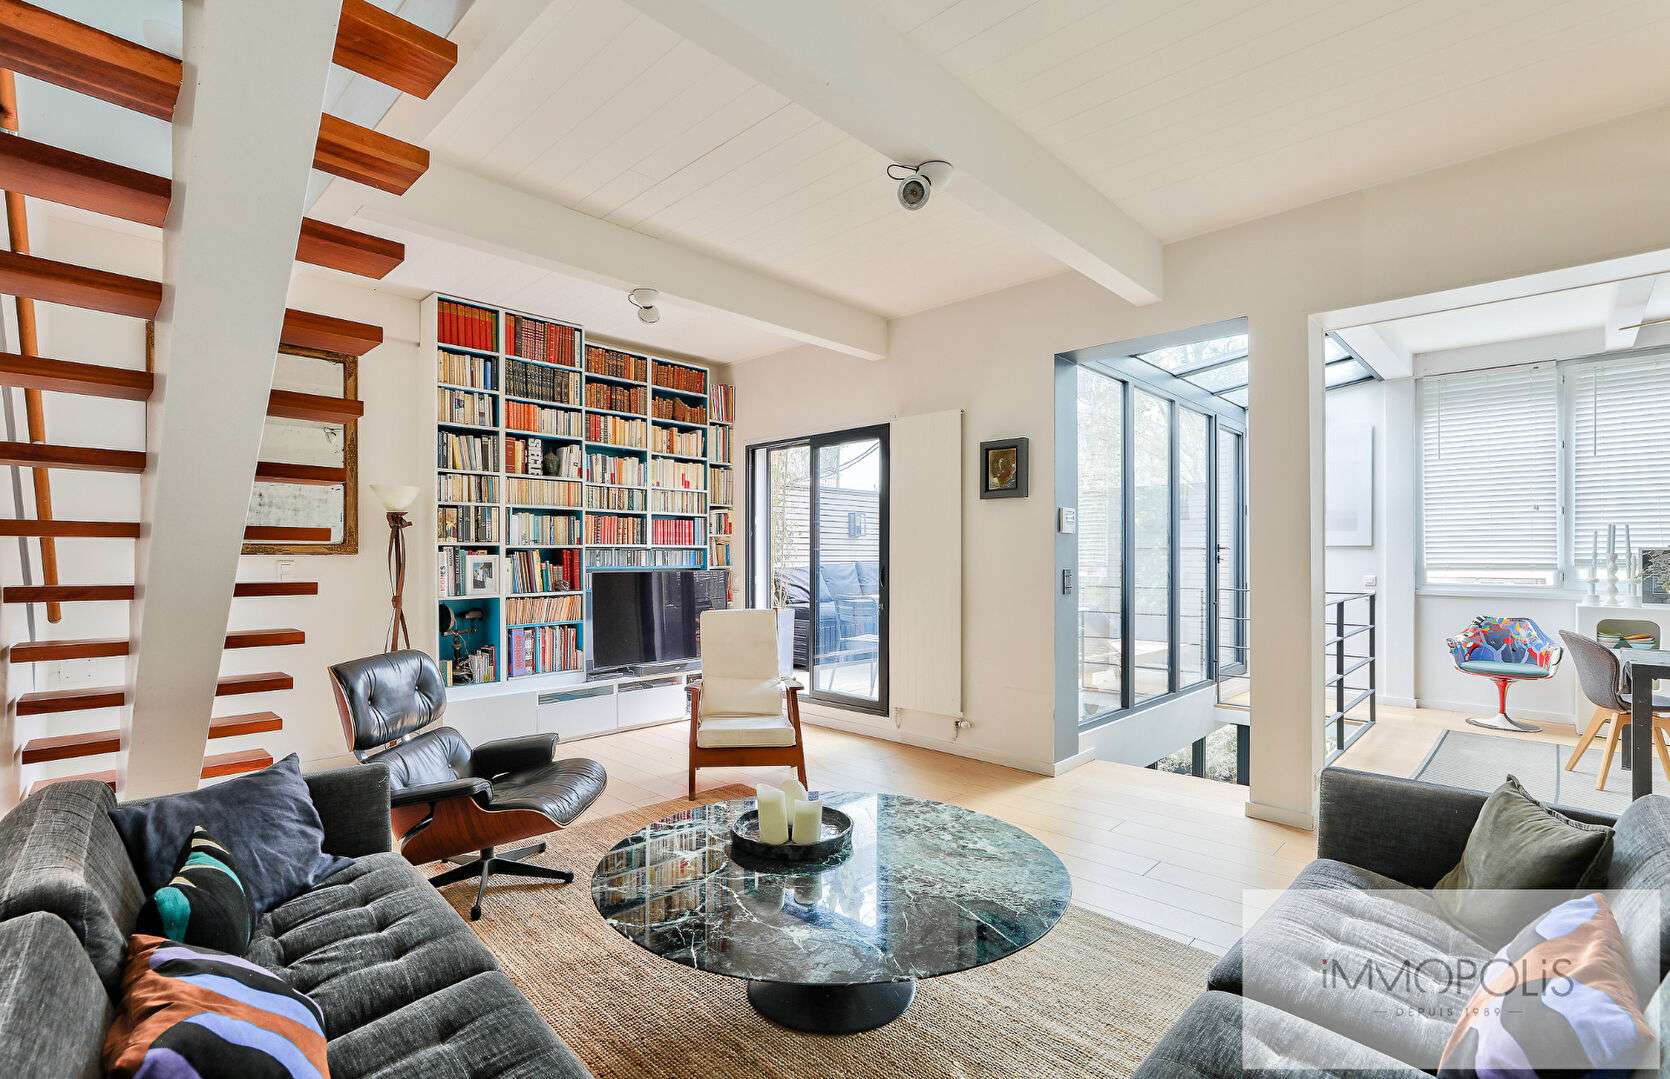 Off-Market: House with exceptional services in Saint Ouen sur Seine, 6 rooms, large reception, 1 interior courtyard and 1 terrace 2